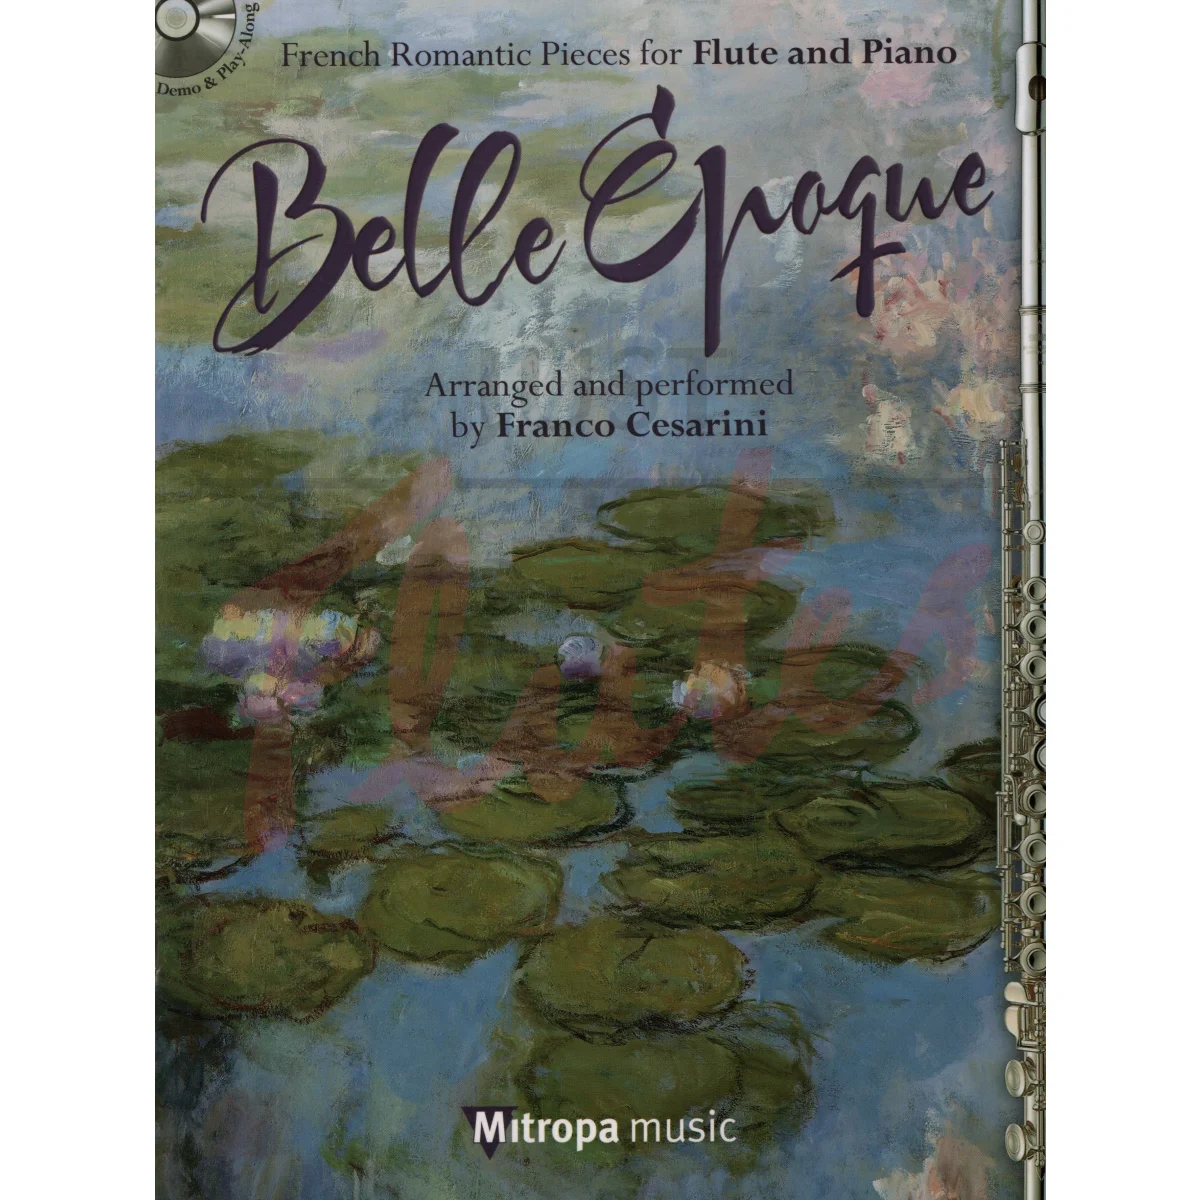 Belle Époque for Flute and Piano